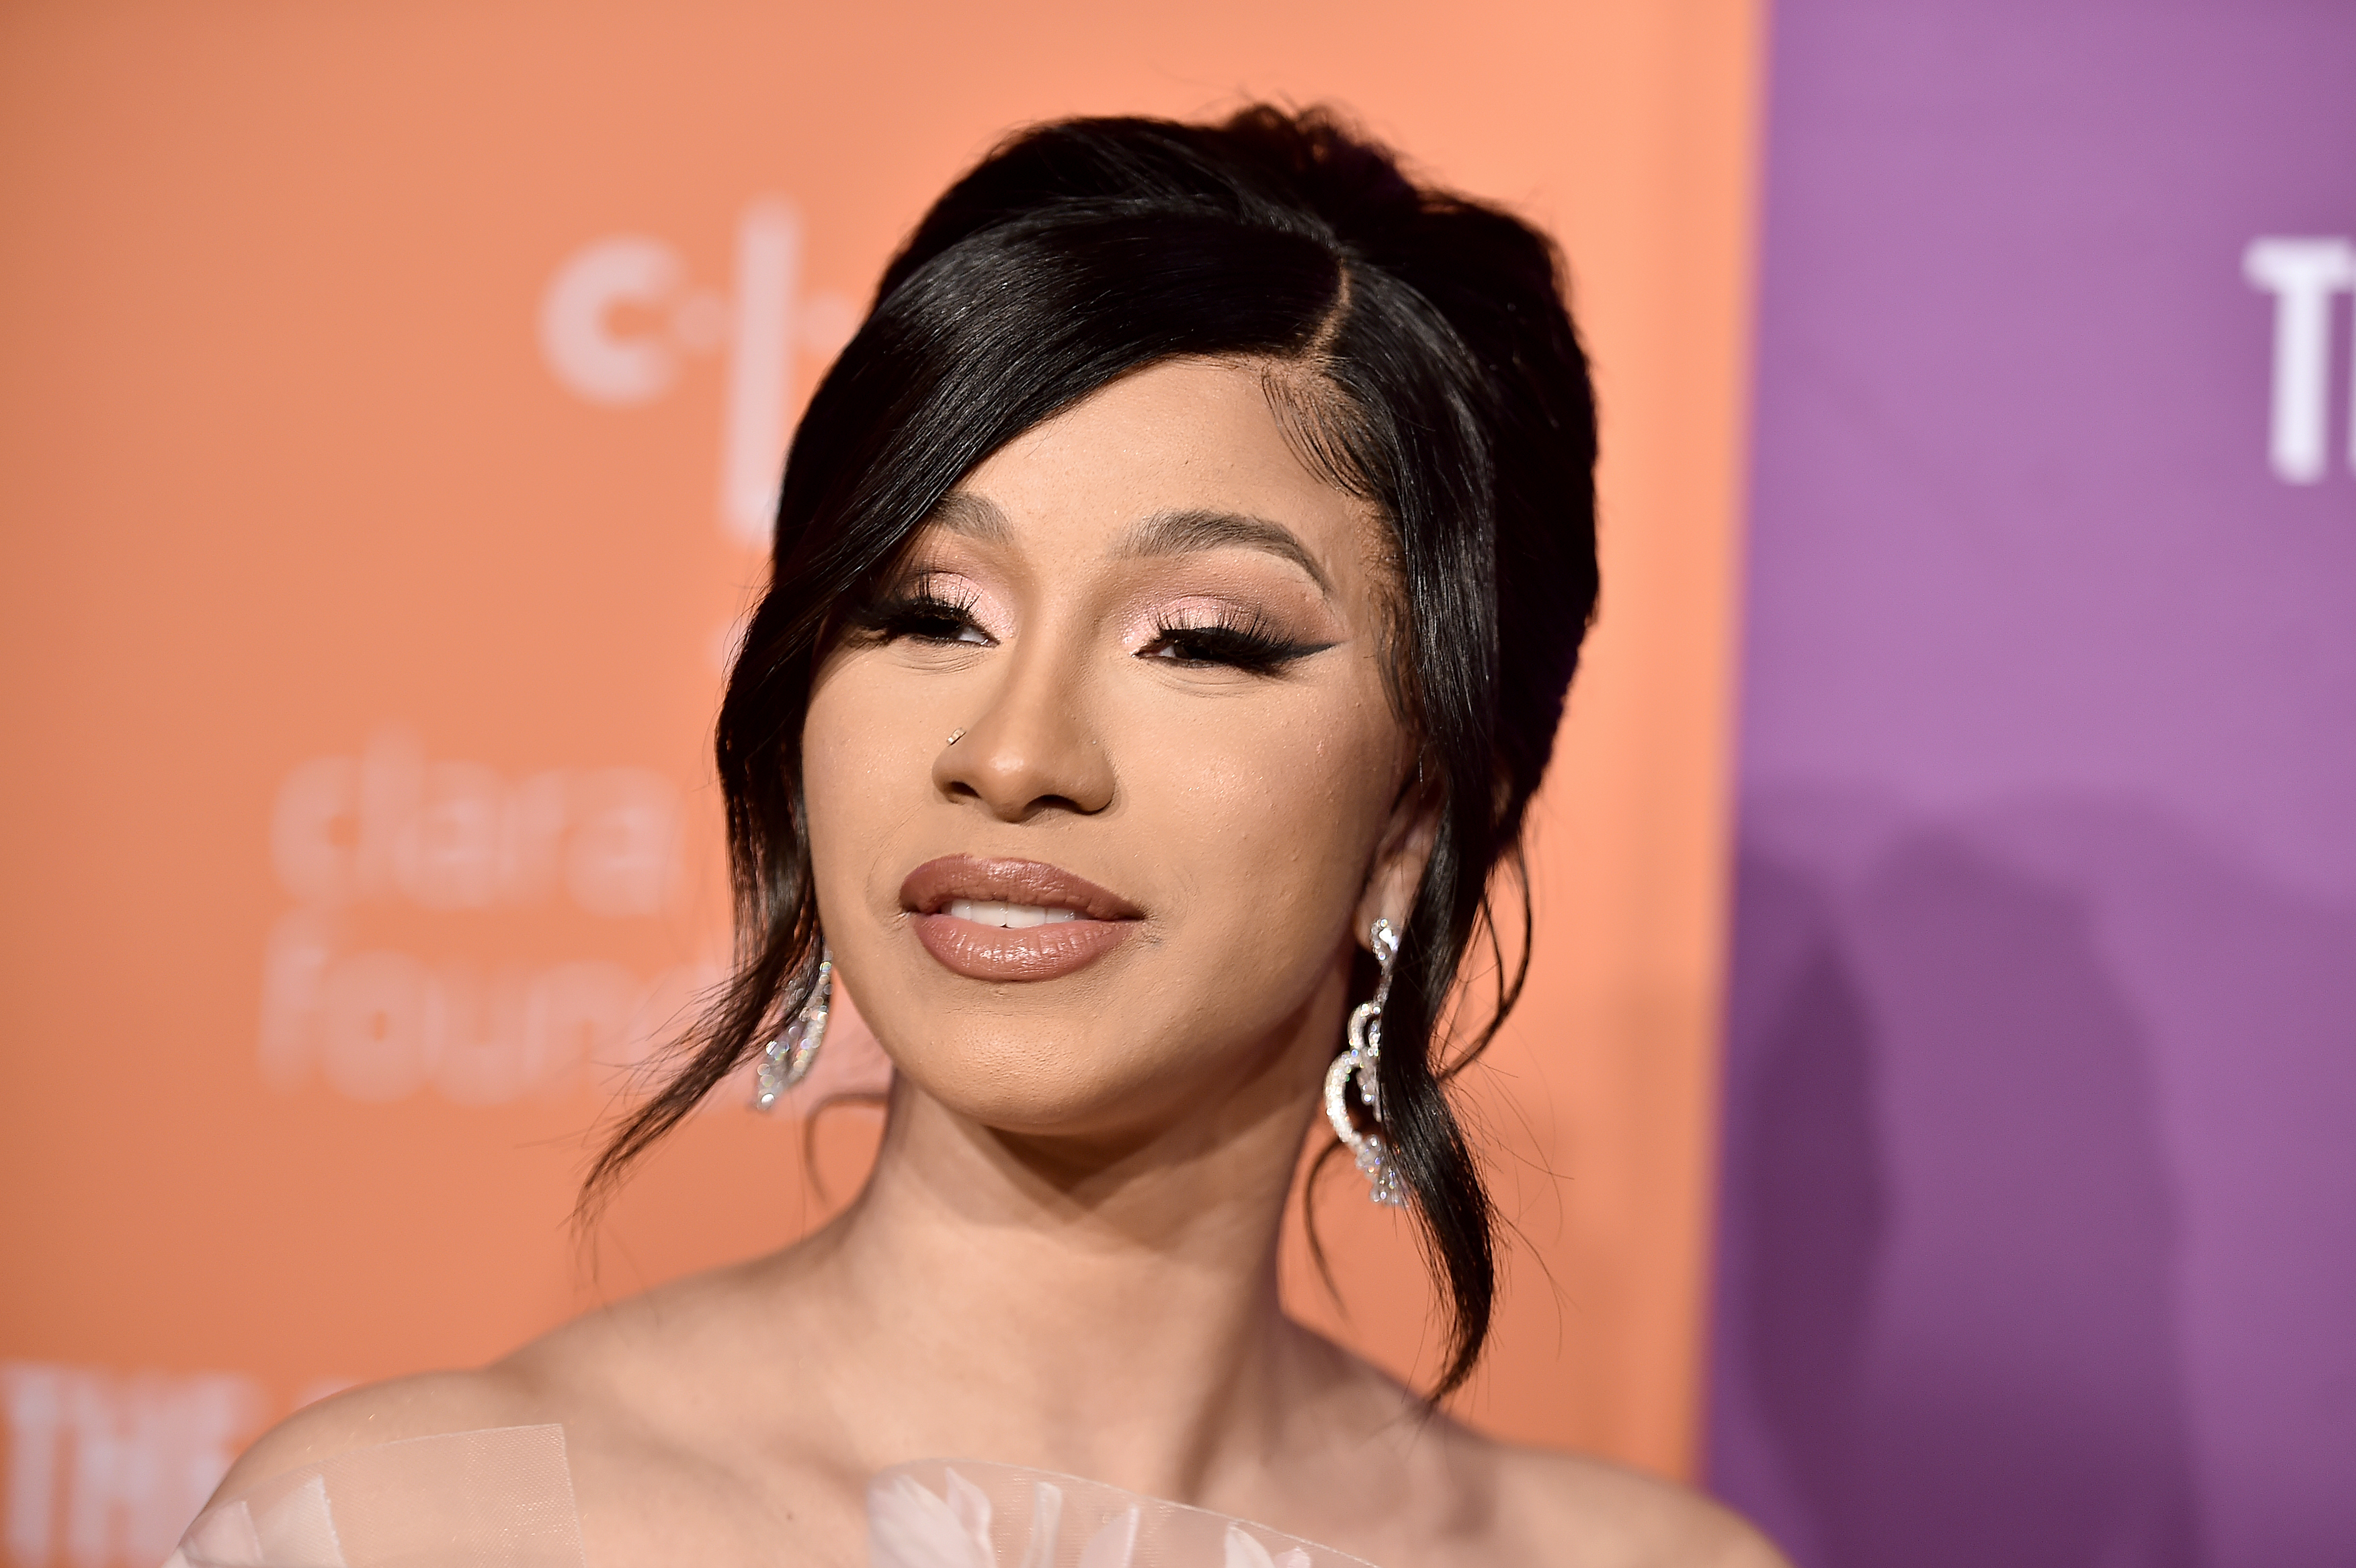 Cardi B Lets Her Booty Out For Jaw-Dropping Poison Ivy Costume For Halloween